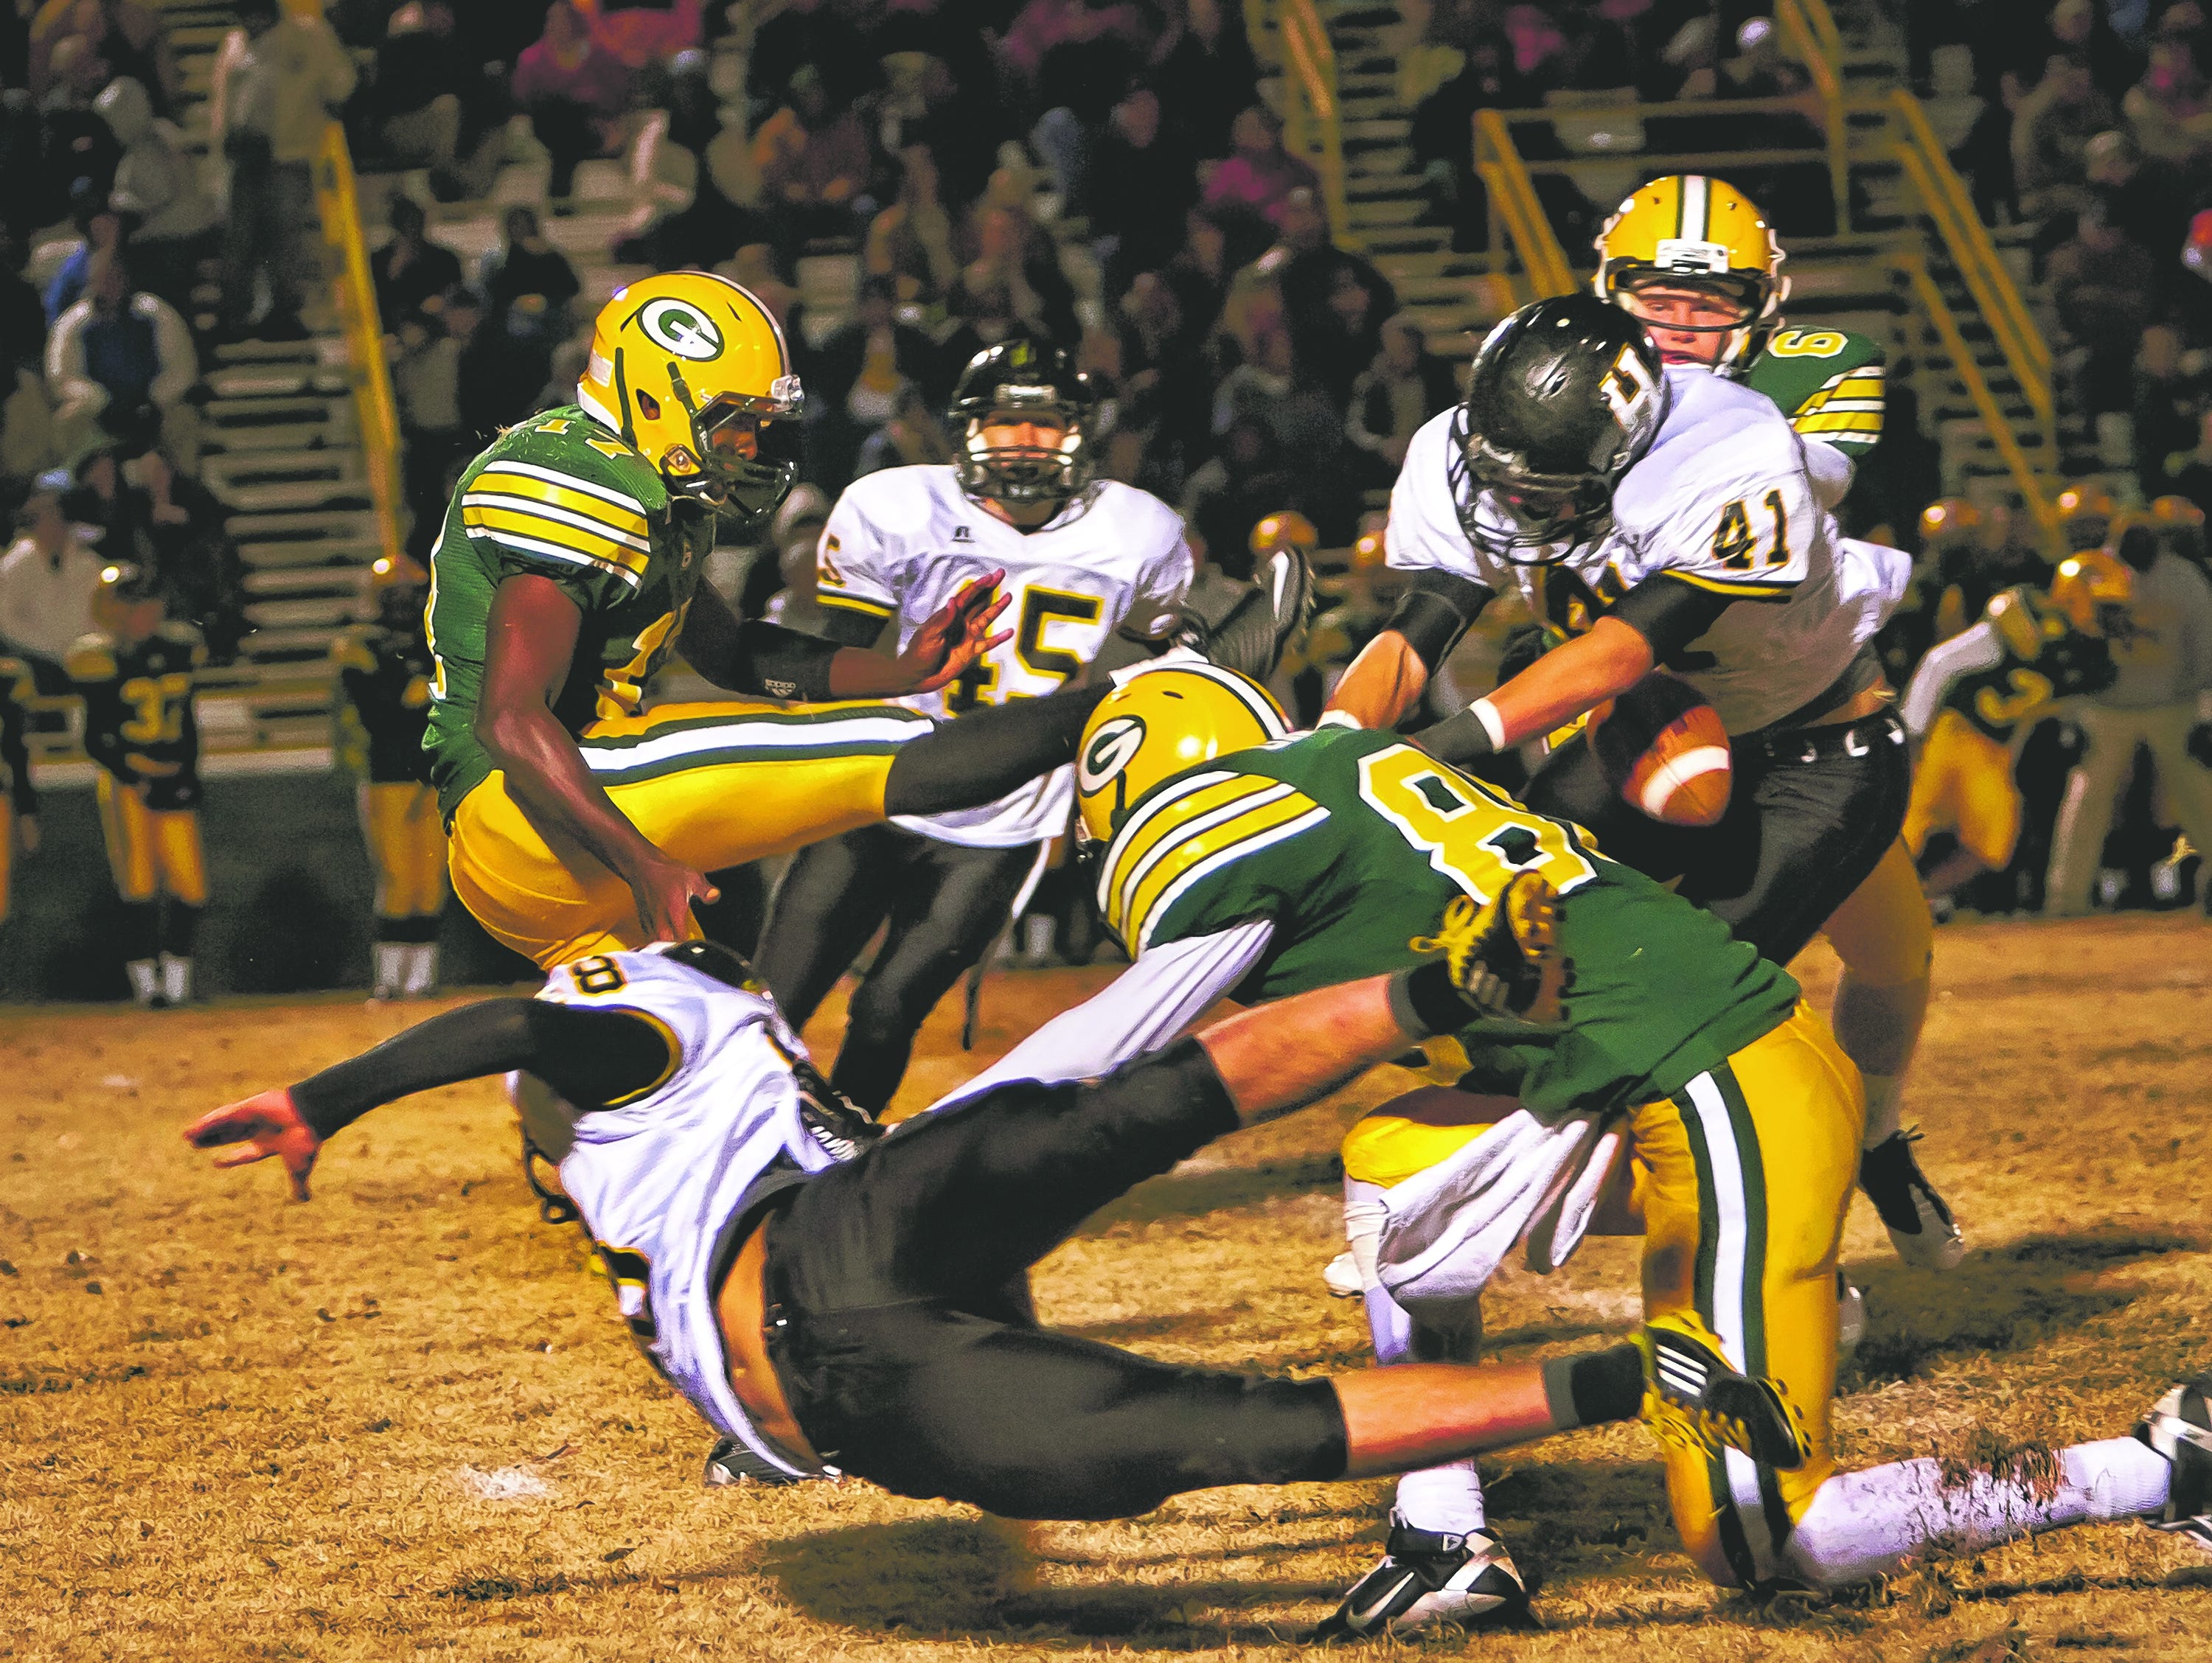 Gallatin and Hendersonville have met in the playoffs three times since 2001.